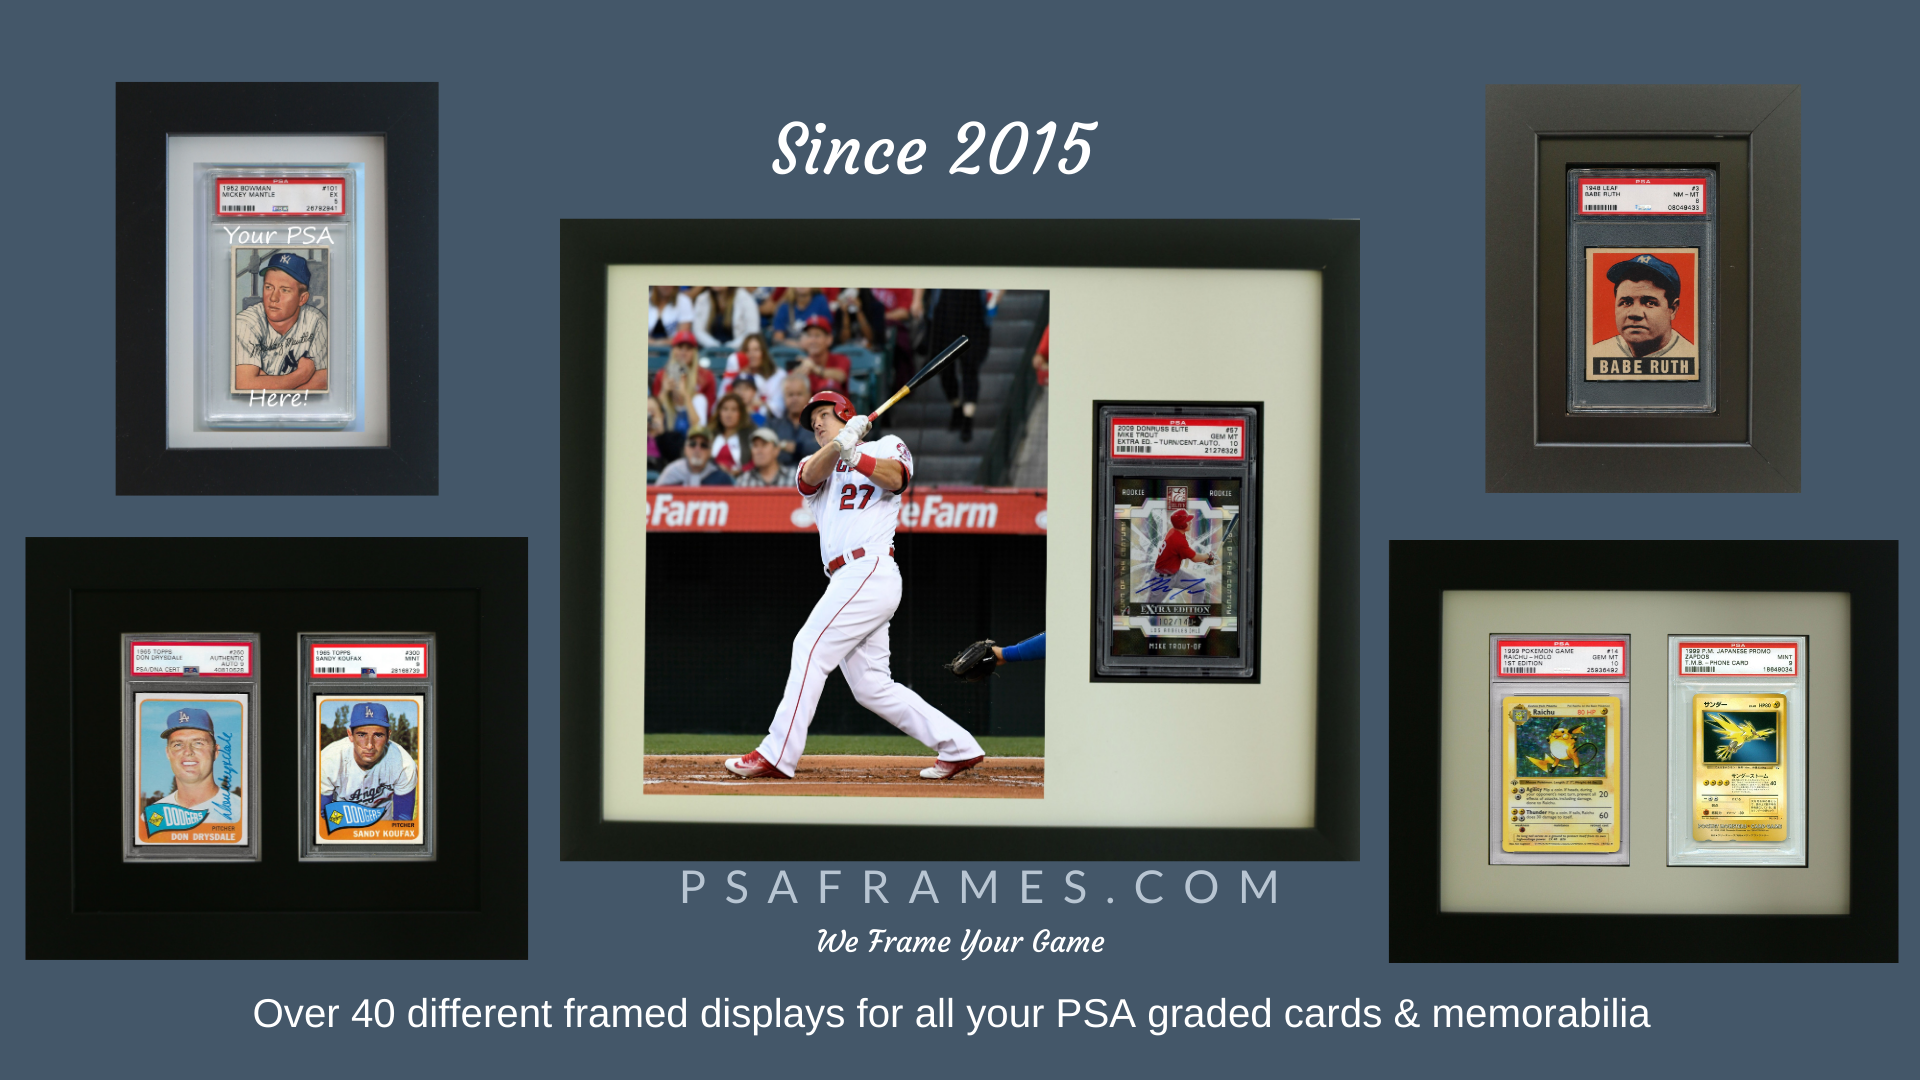 NEW-8x10 size Framed Display for a PSA Graded Horizontal Card 